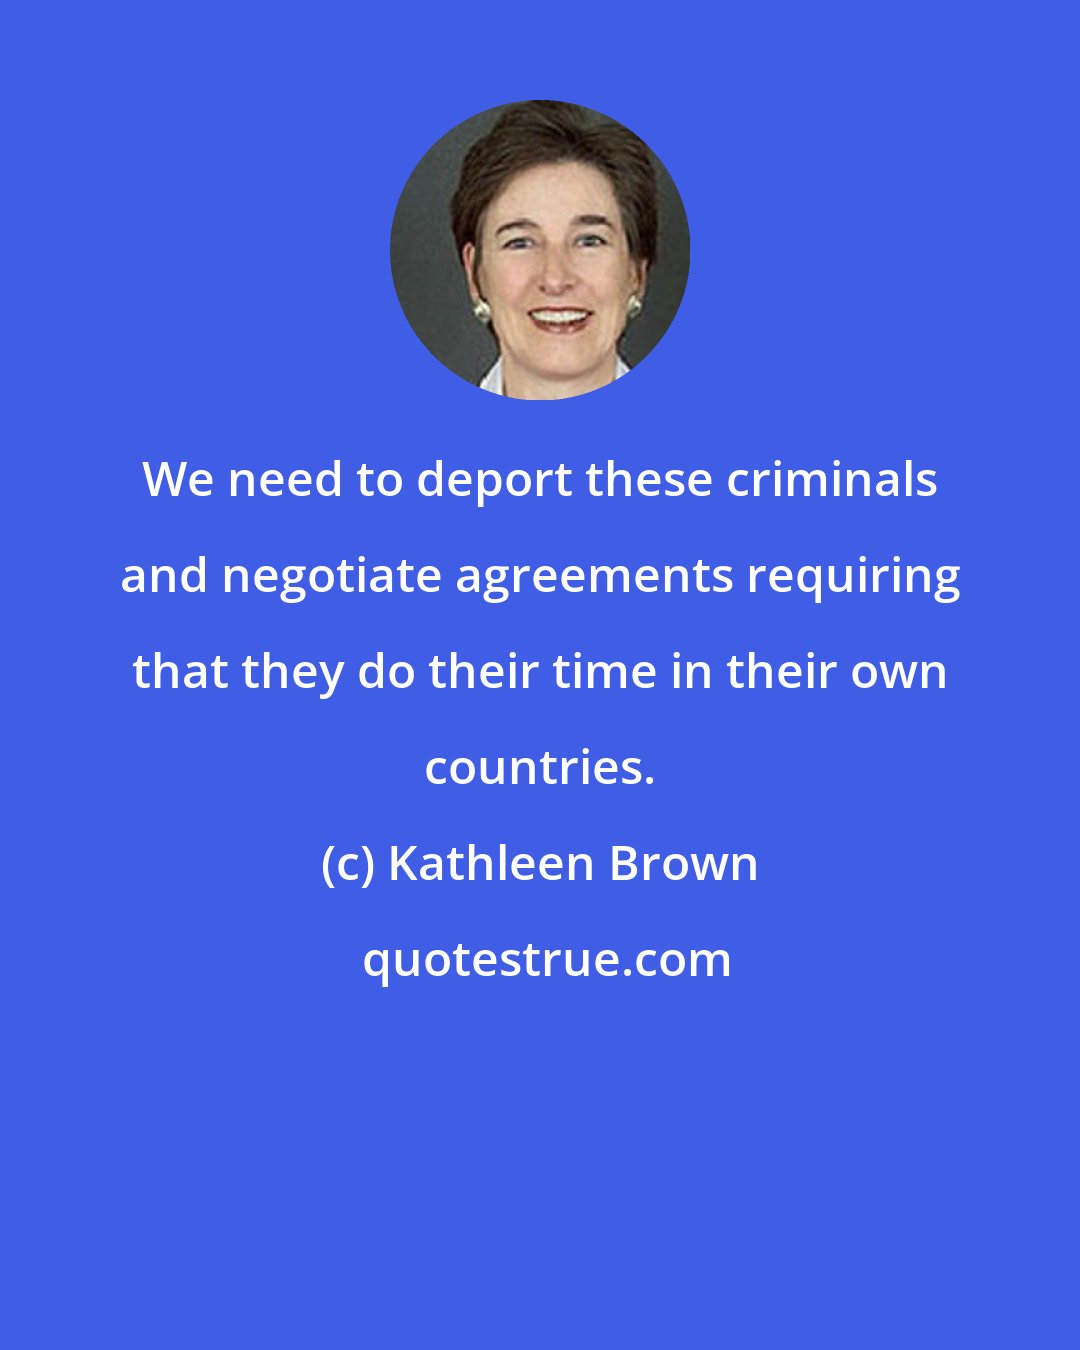 Kathleen Brown: We need to deport these criminals and negotiate agreements requiring that they do their time in their own countries.